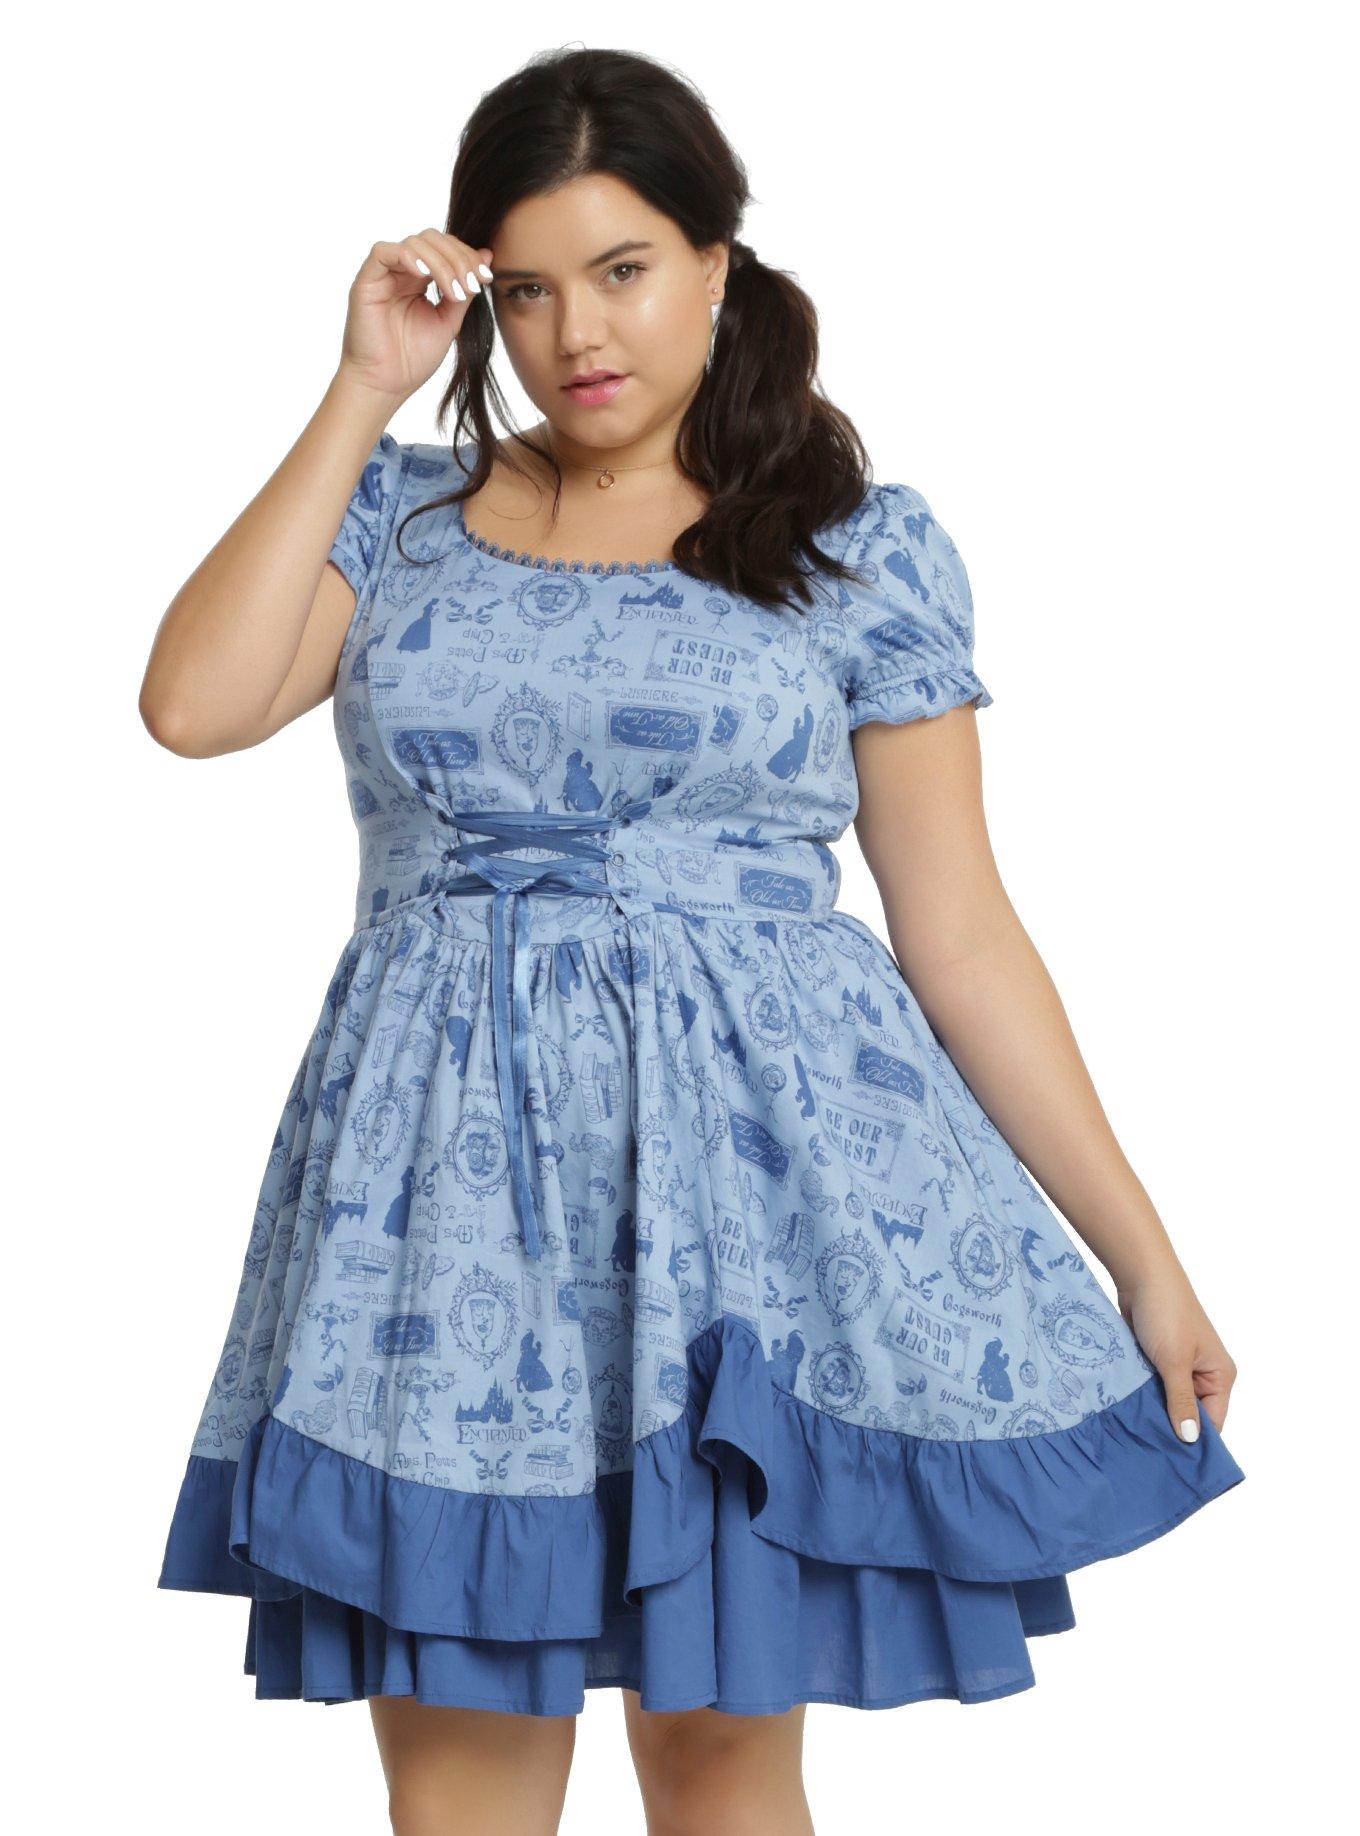 Disney Beauty And The Beast Ruffle Dress Plus Size Hottopic